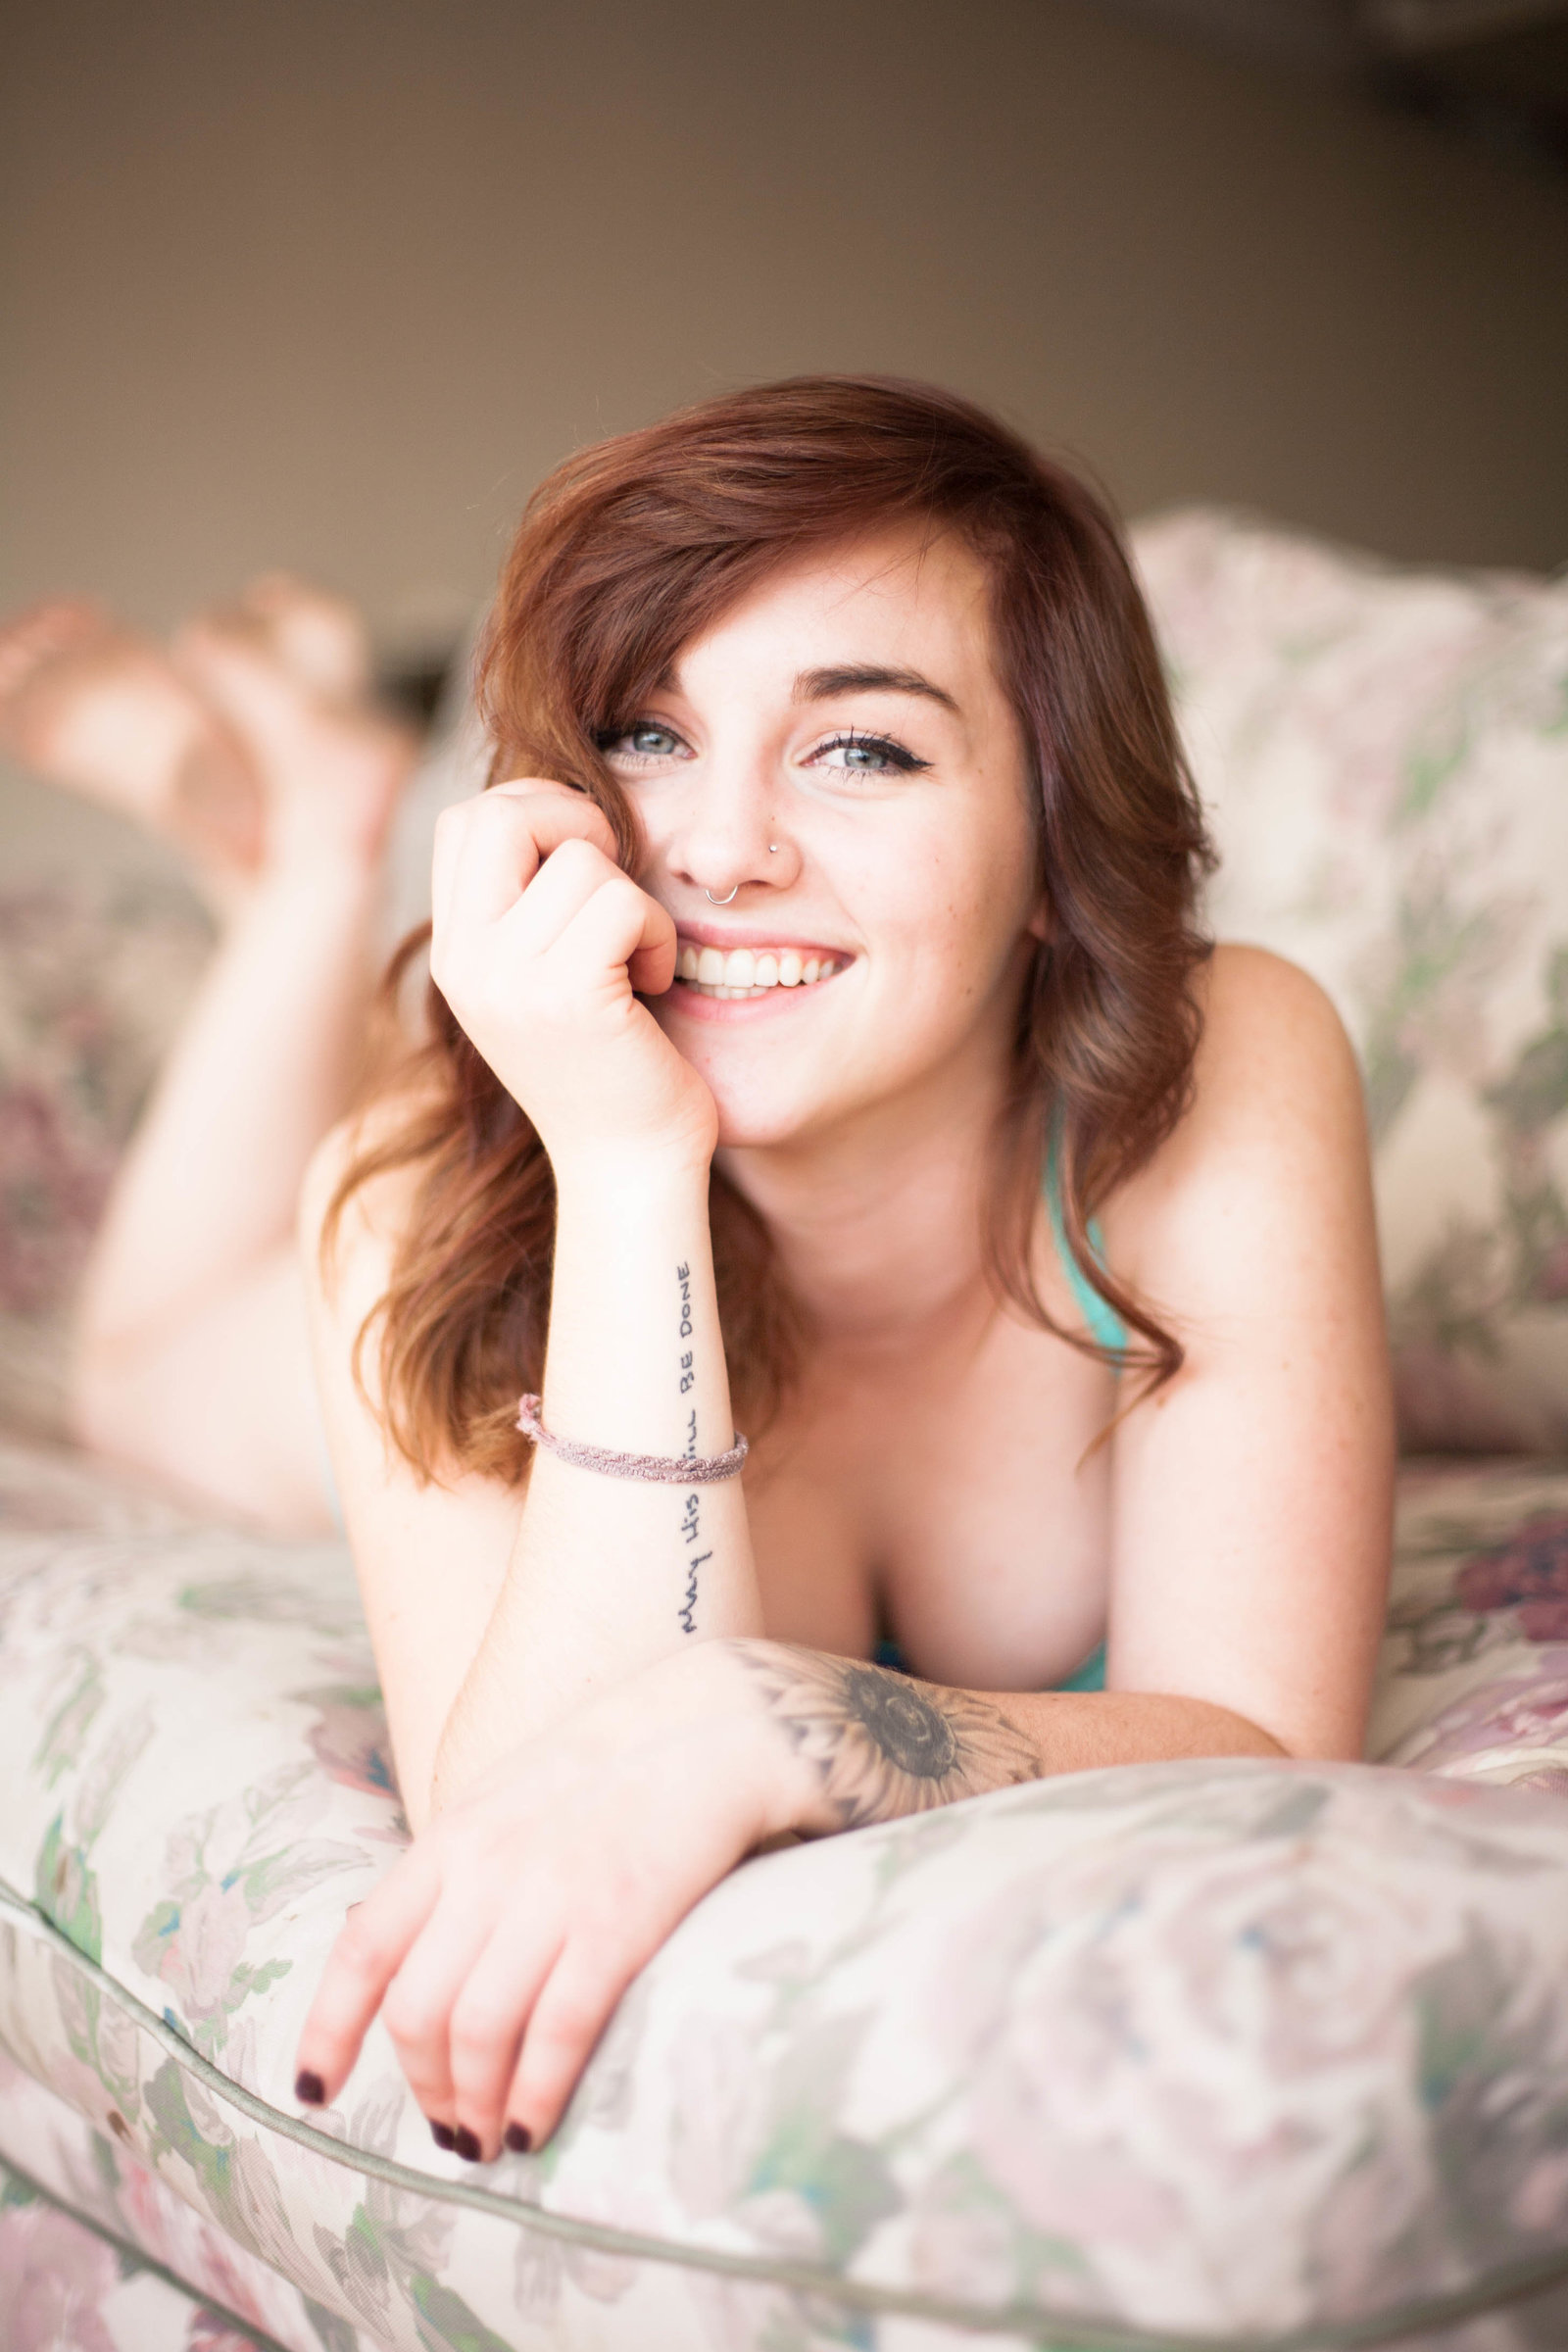 Woman wearing lingerie smiling during a boudoir photography session.